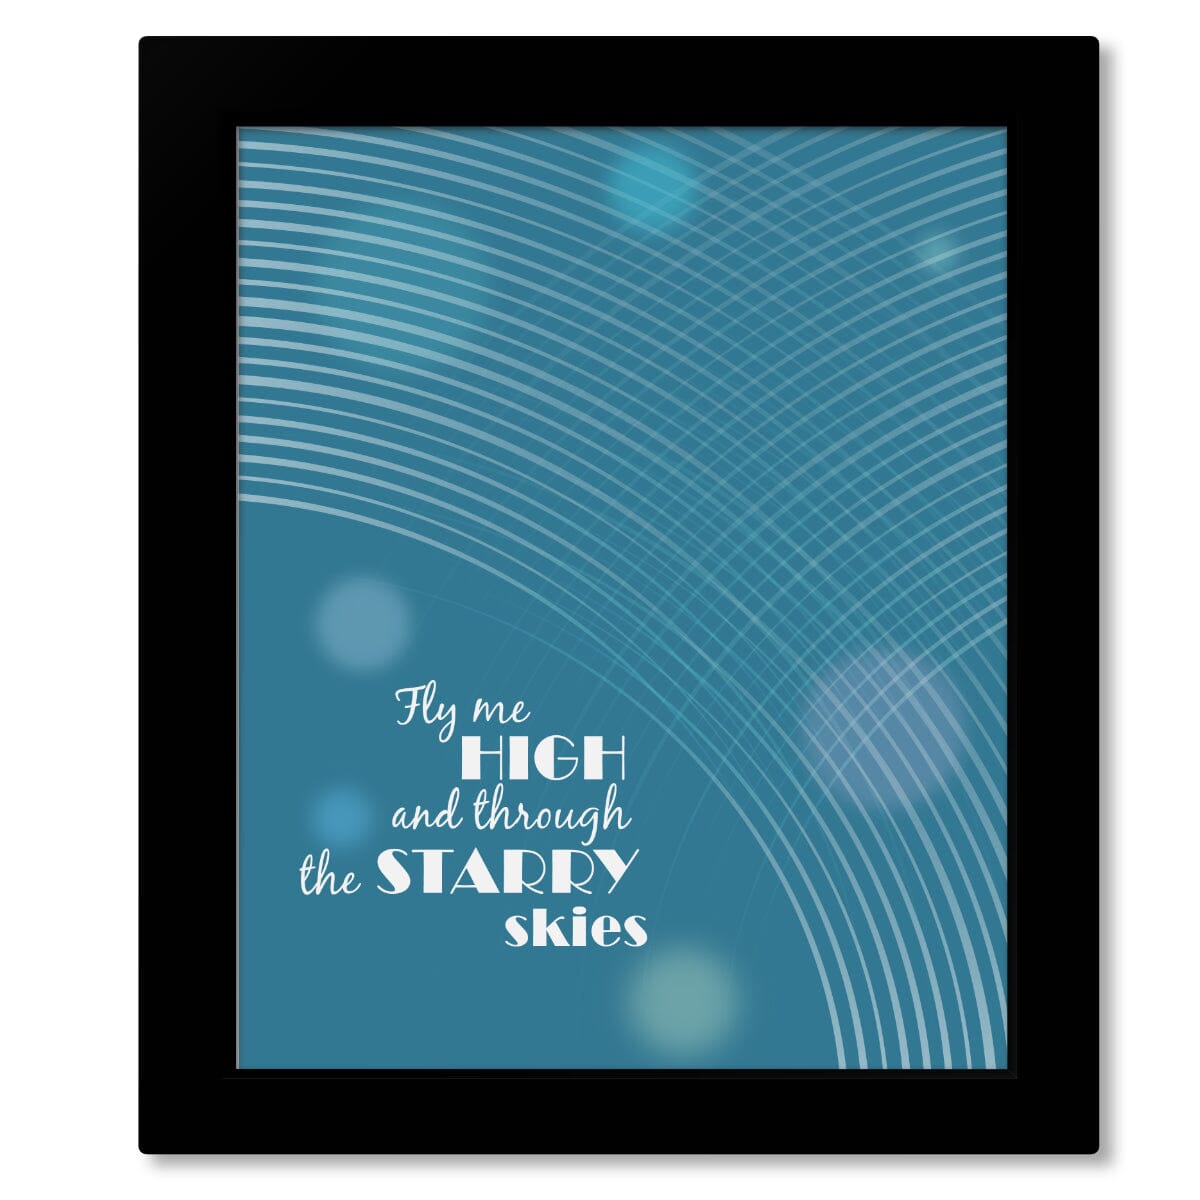 Dream Weaver by Gary Wright - 70s Song Lyric Quote Poster Song Lyrics Art Song Lyrics Art 8x10 Framed Print (without mat) 